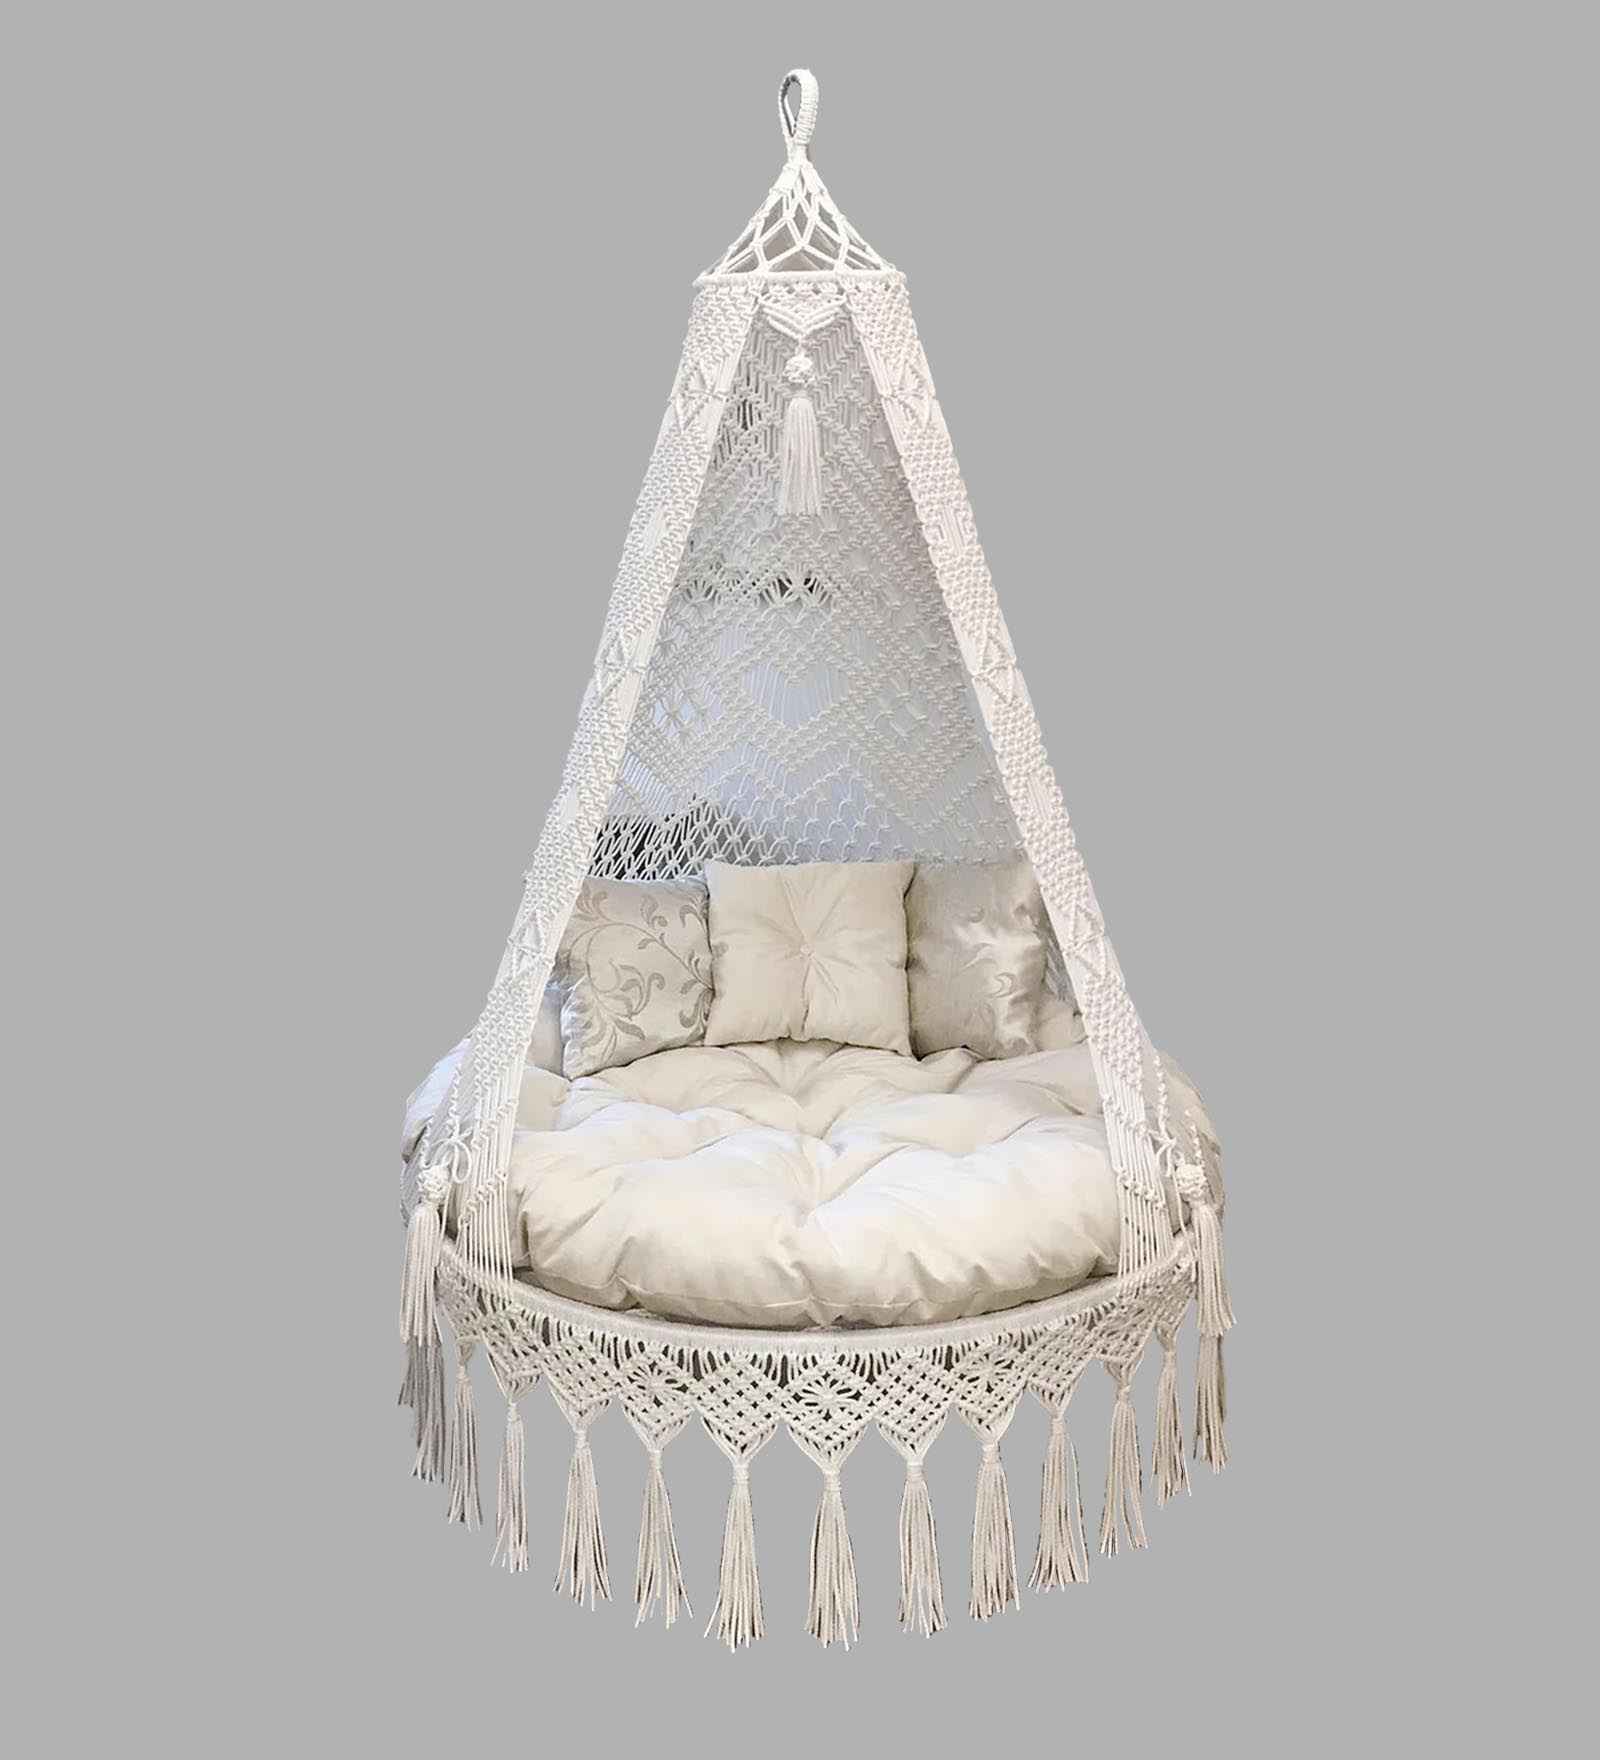 Kaahira Best Gift Handwoven Swing in Off White